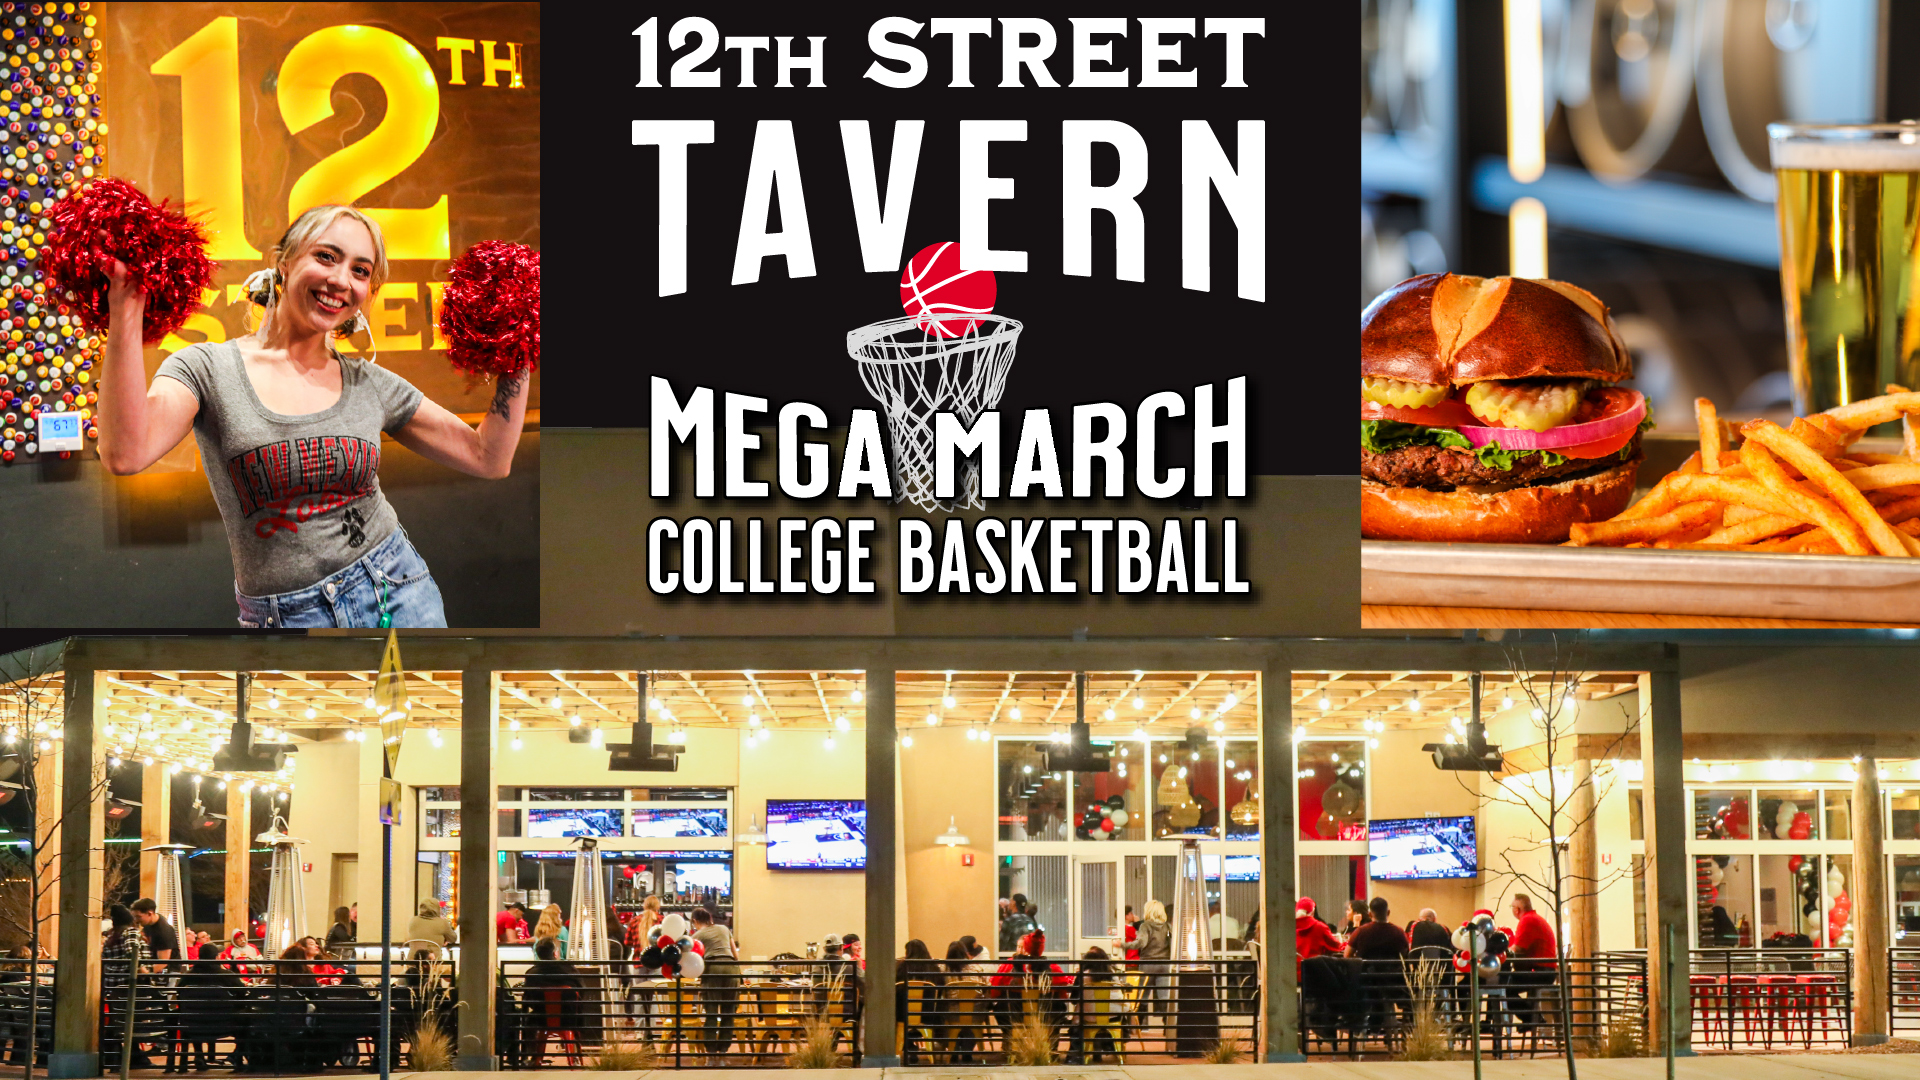 Watch College basketball at the tavern